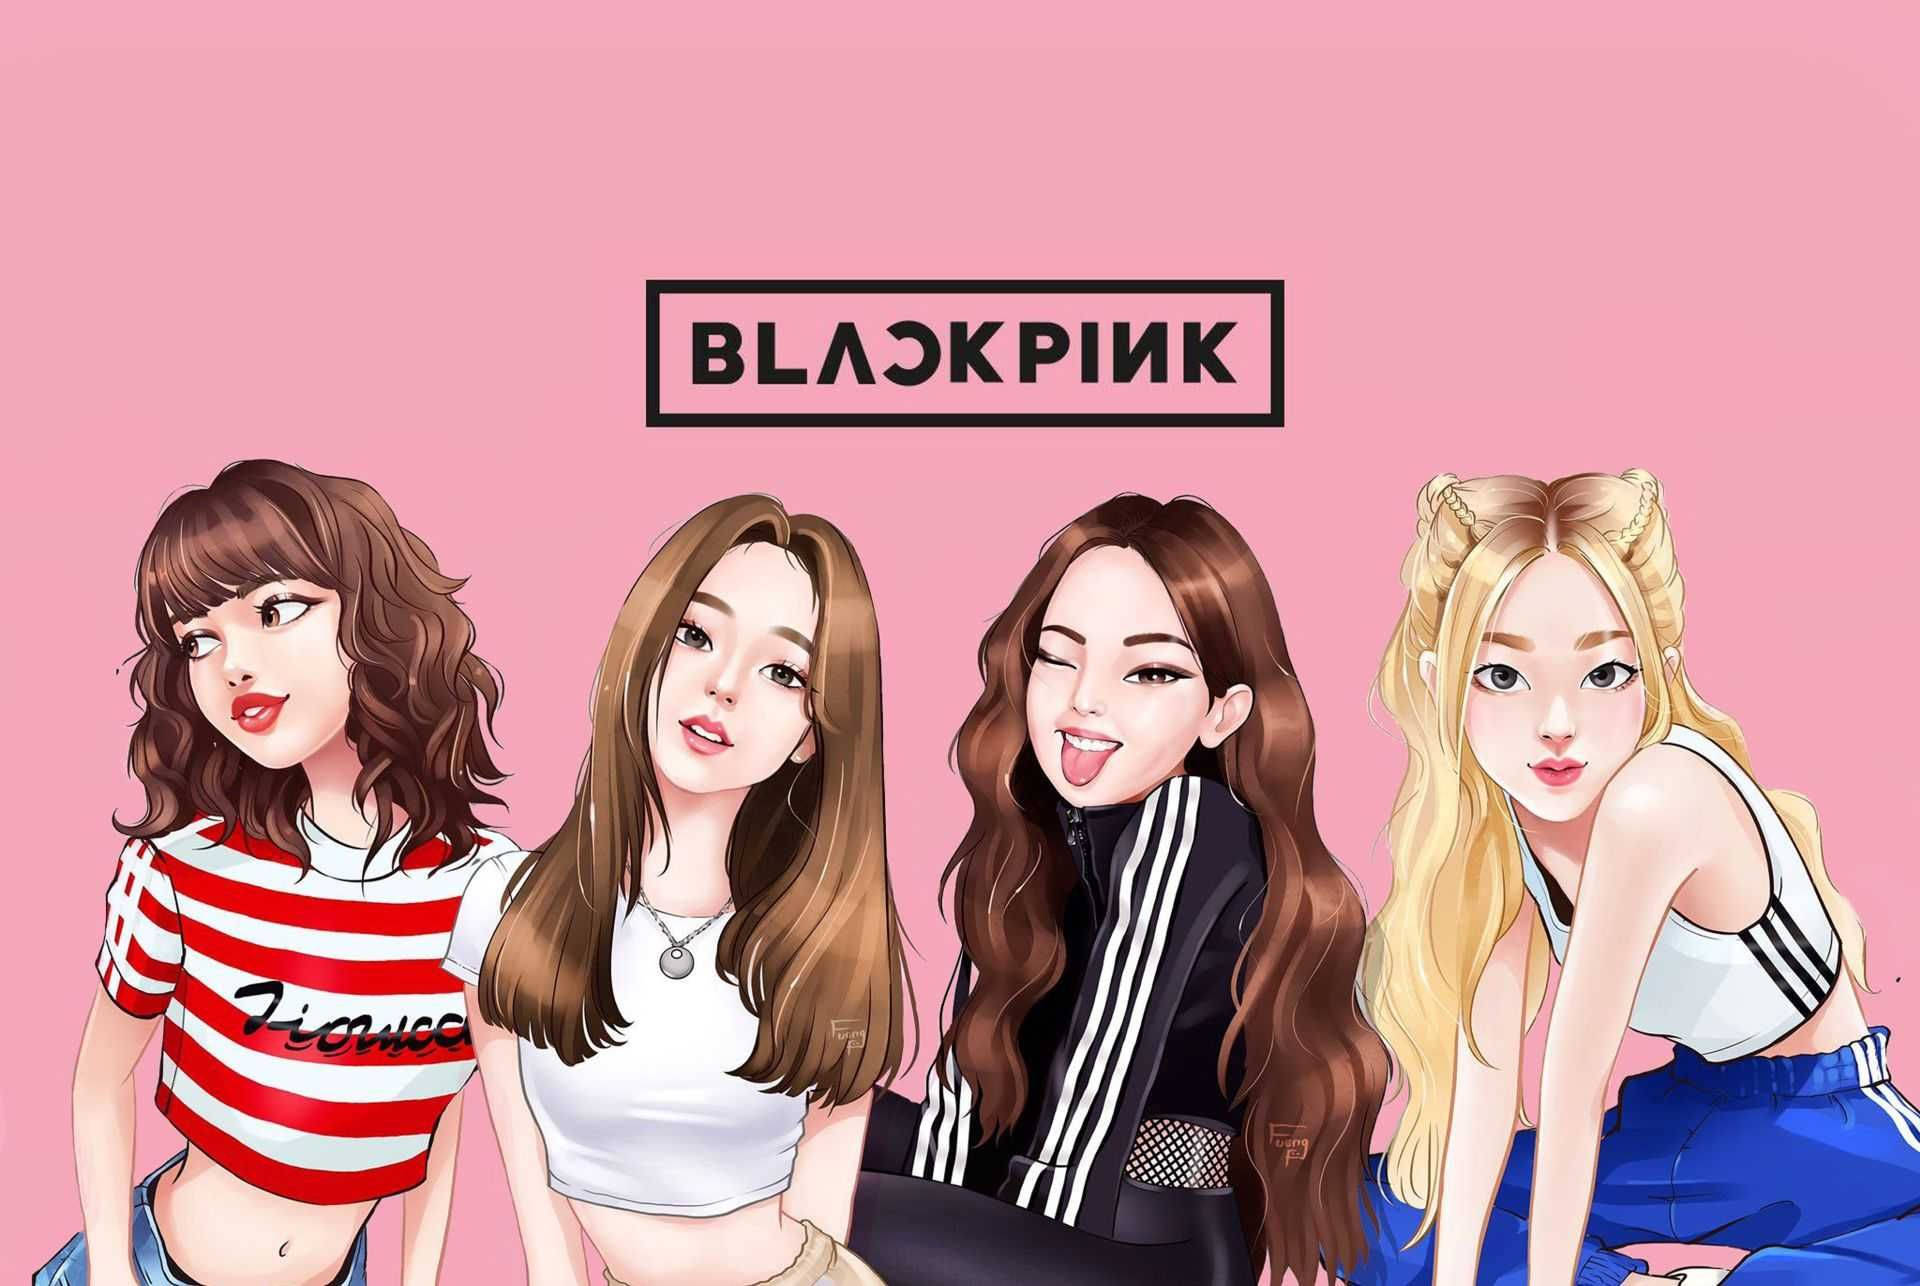 Blackpink Logo With Animated Members